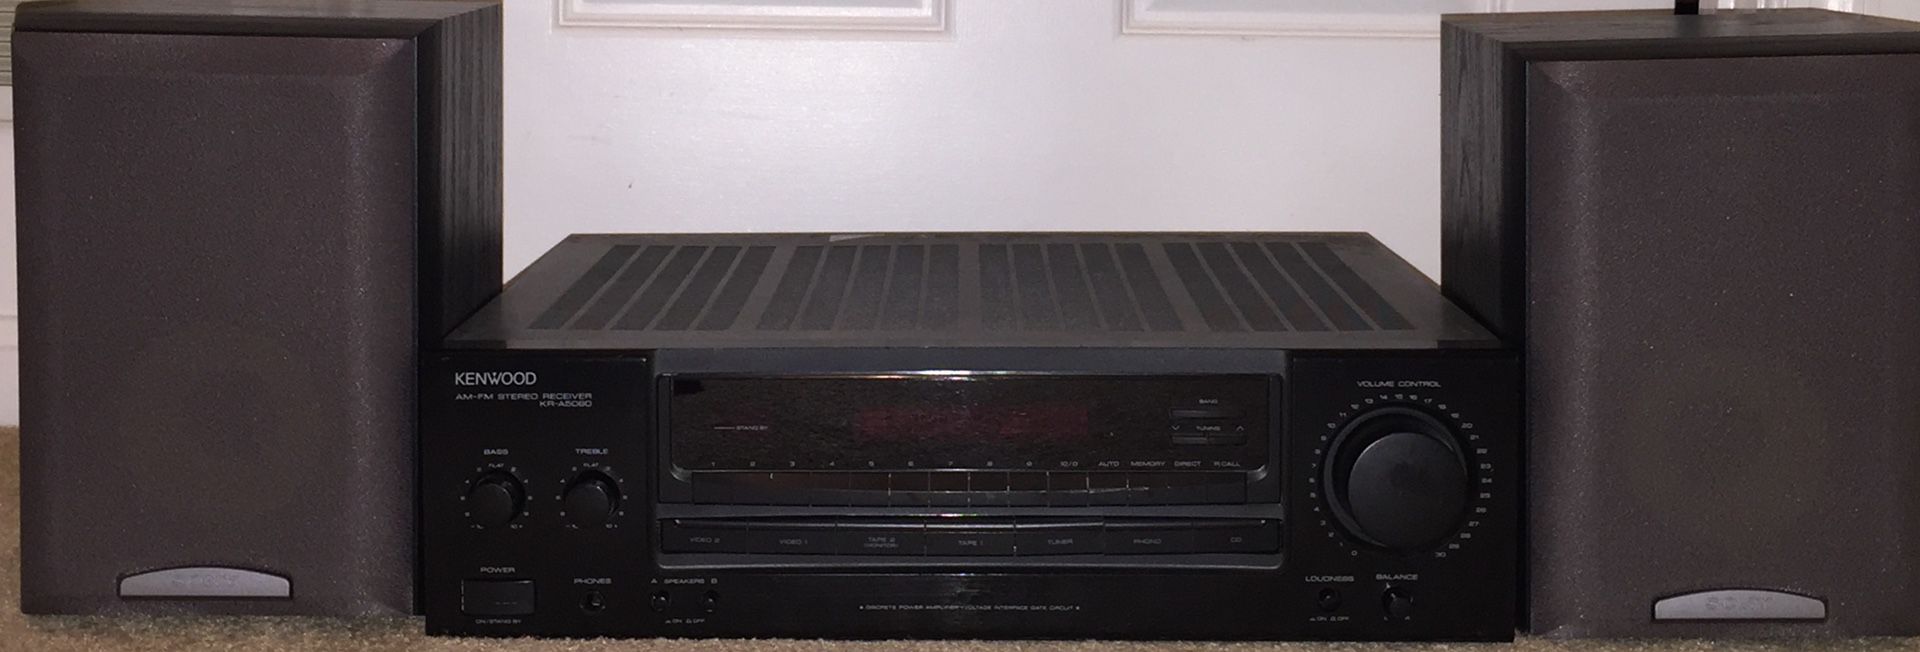 Kenwood Stereo Receiver with two Sony Speakers